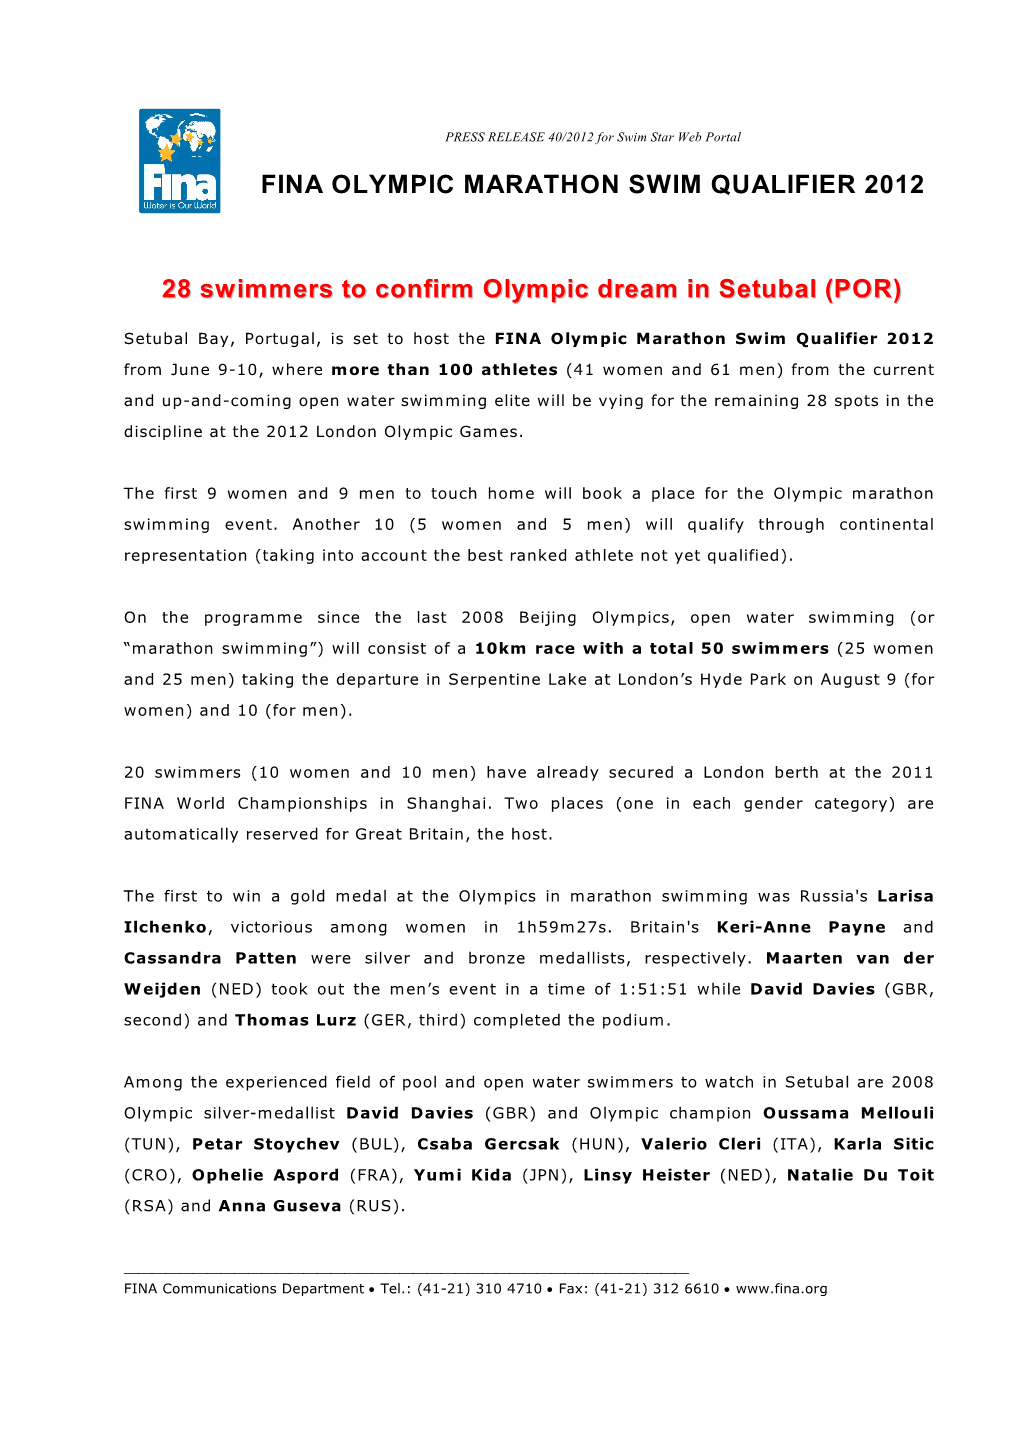 28 Swimmers to Confirm Olympic Dream in Setubal (POR)